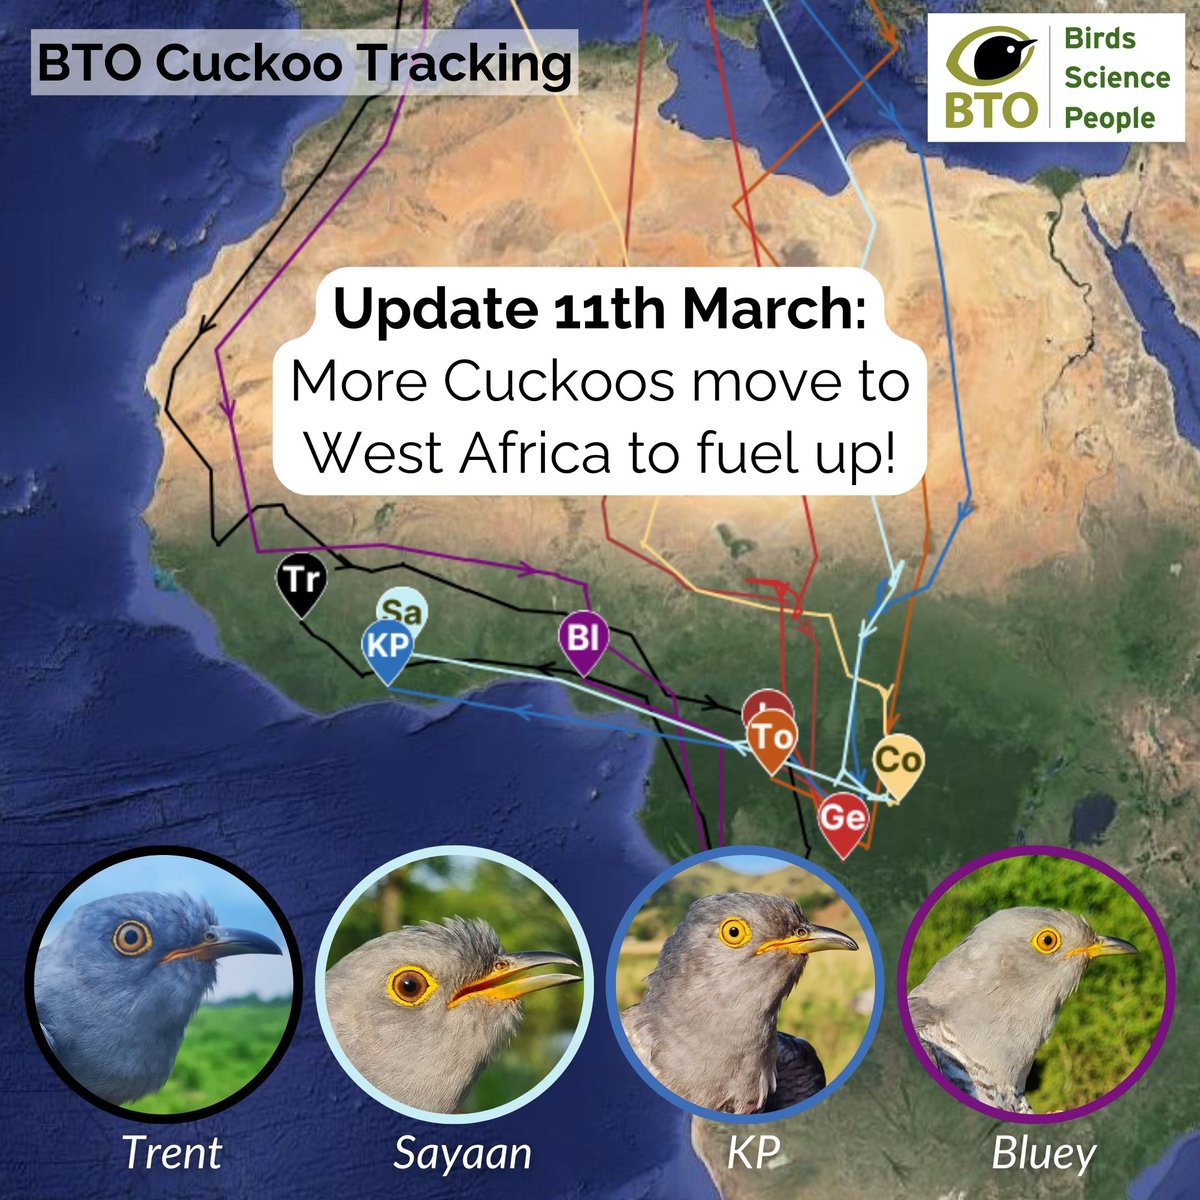 Cuckoo update! More of our satellite-tagged Cuckoos are leaving their wintering grounds to feed up in West Africa. We didn't know they took this migration route before tracking! When will they begin their risky Sahara crossing? Keep an eye on them at bto.org/cuckoos